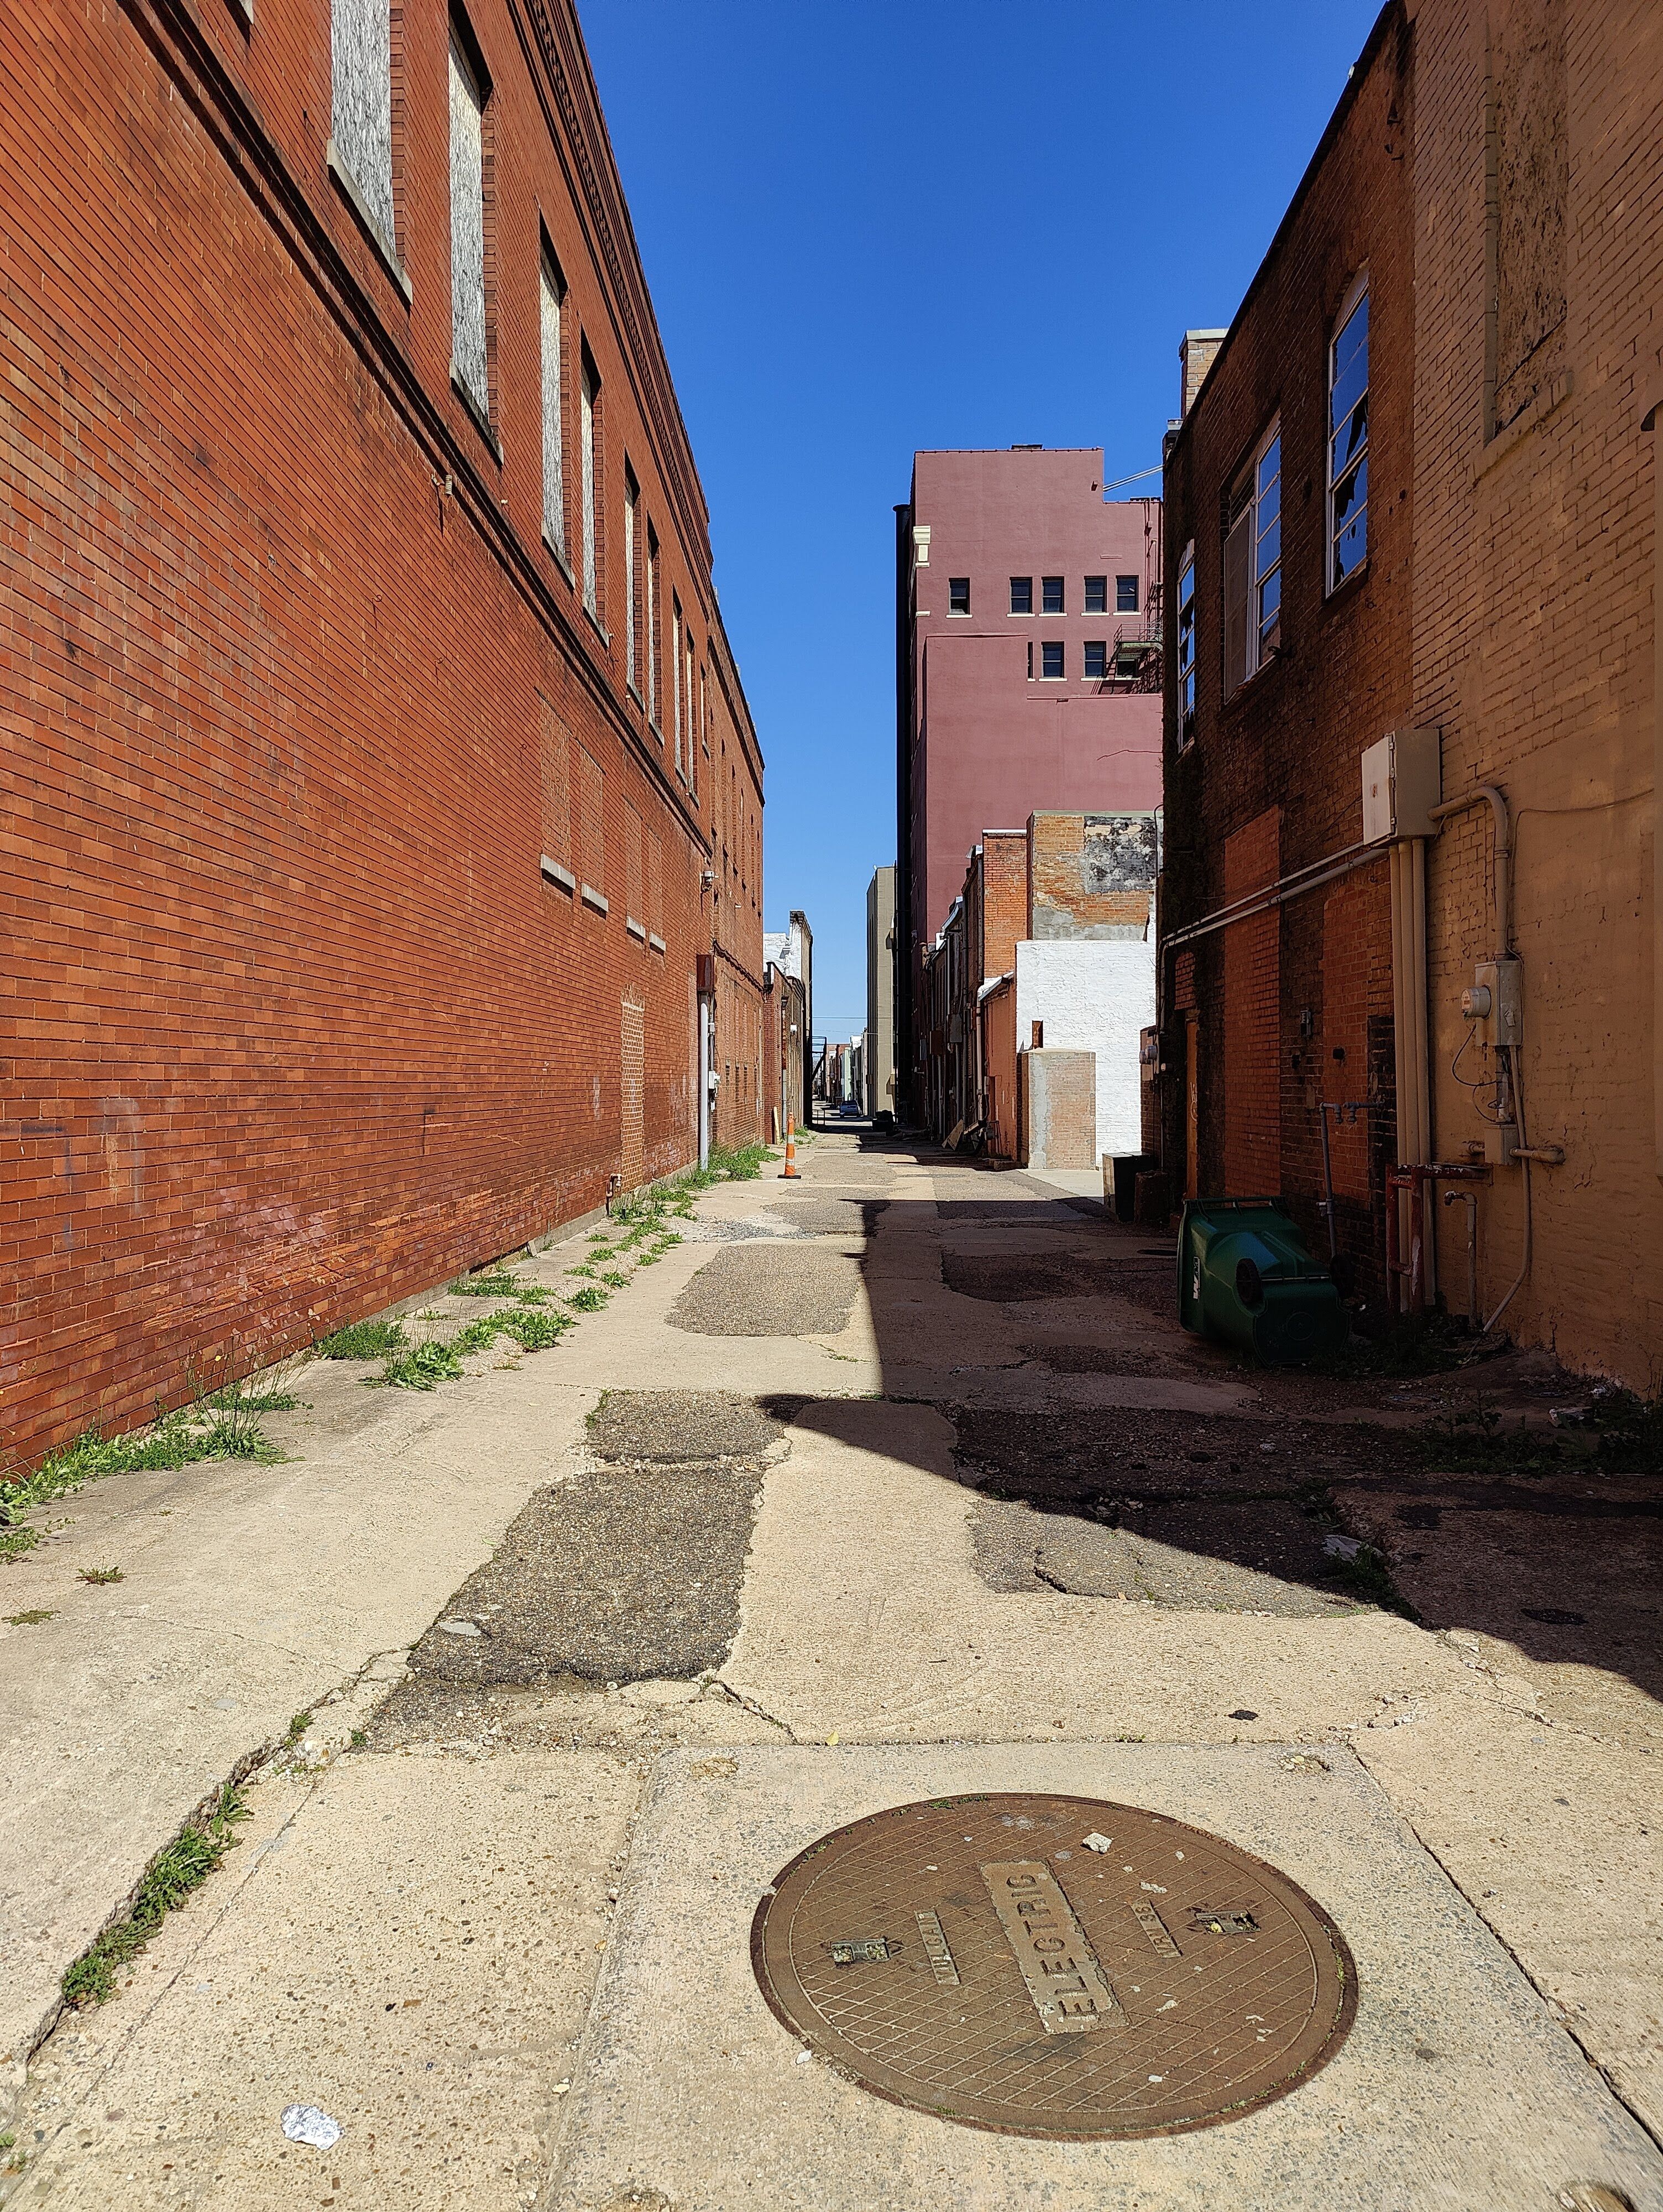 OnePlus 9 Pro Camera Sample: An alleyway shot with the main camera